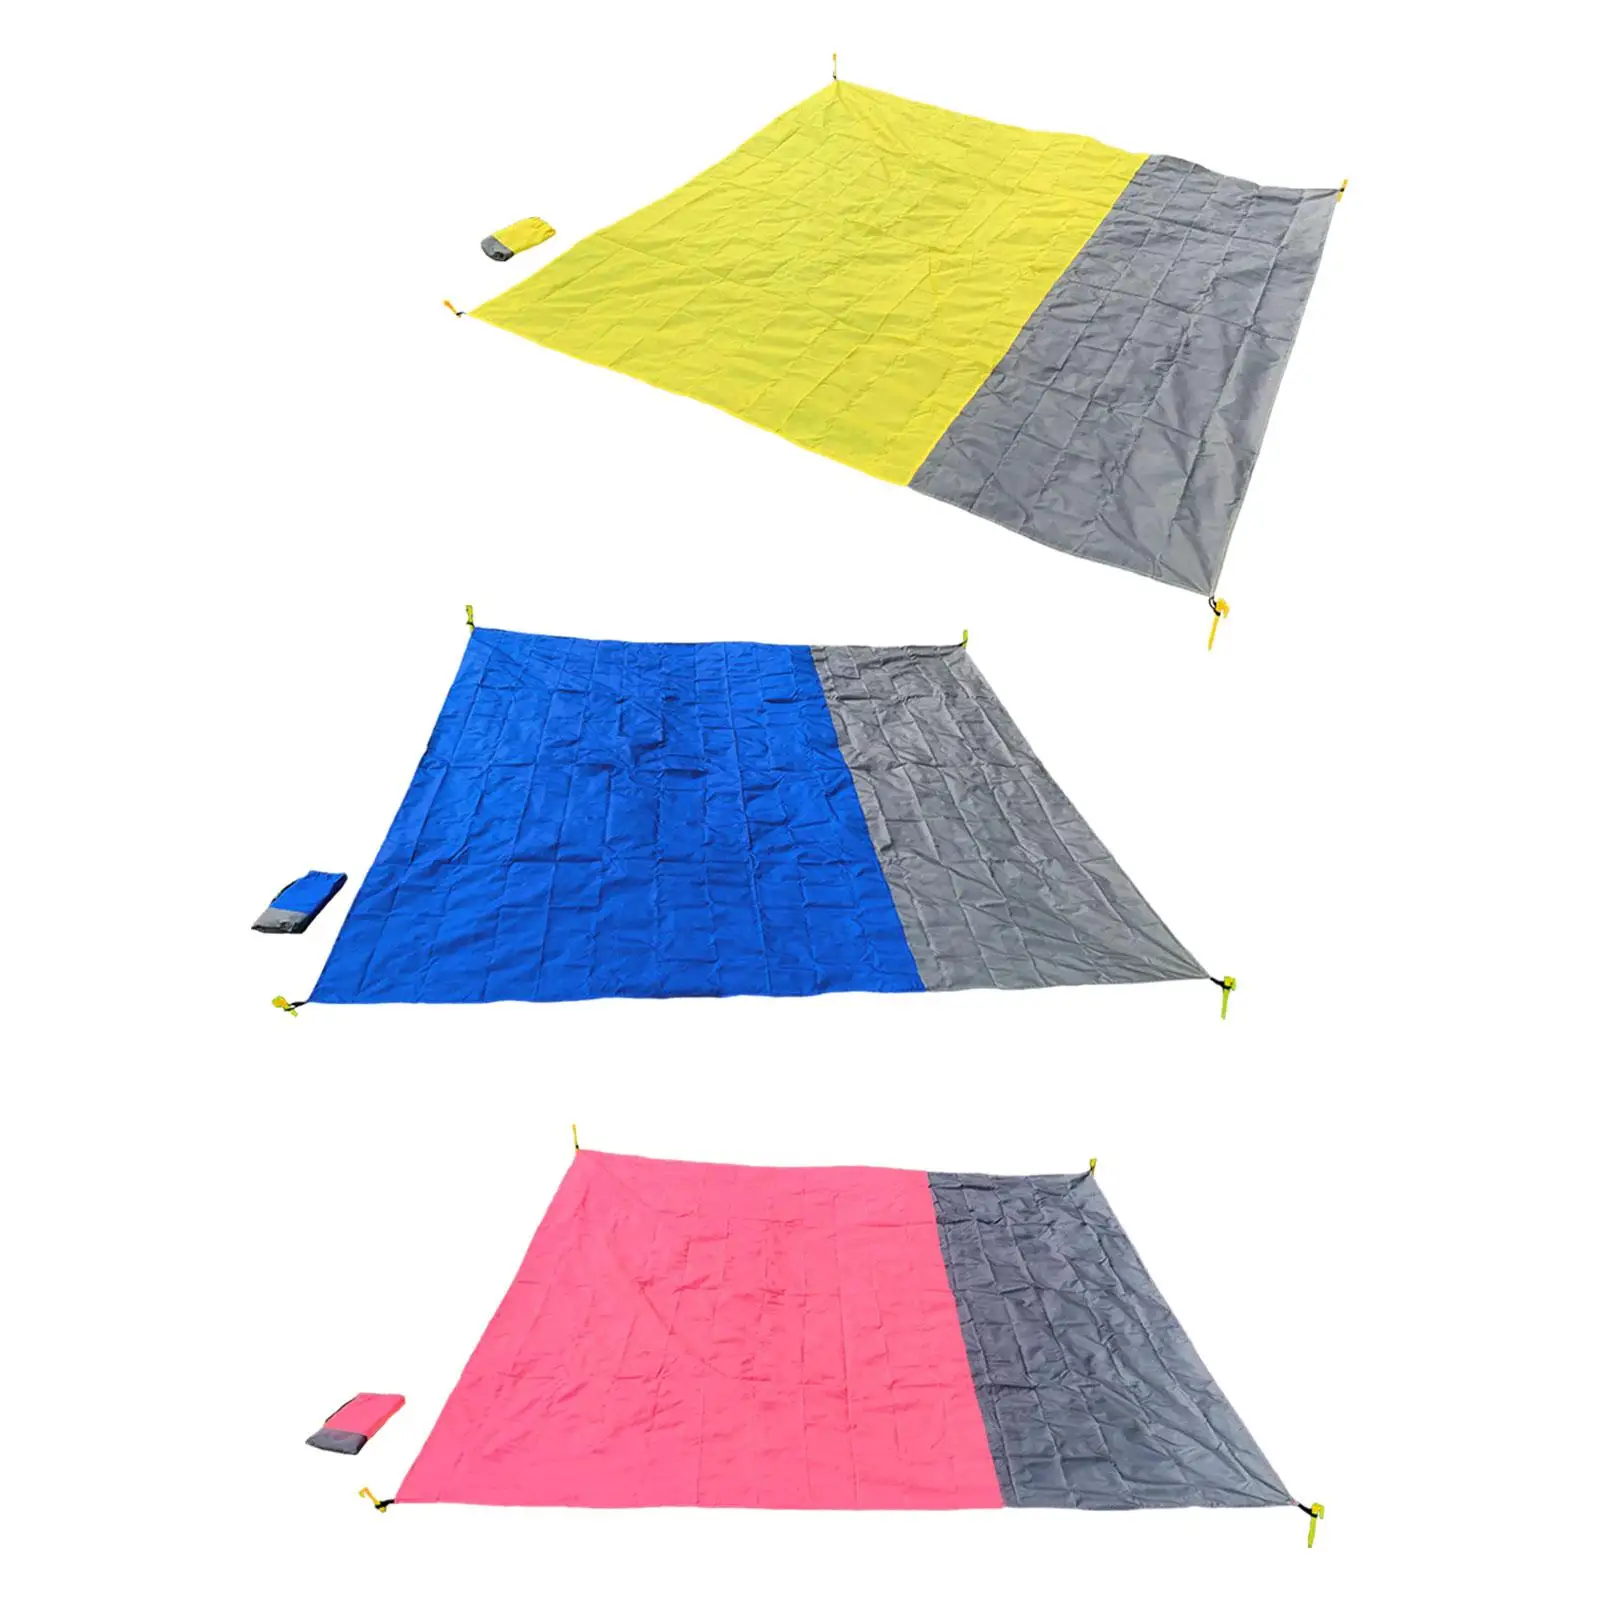 Picnic Blanket Folding Outdoor Mat with Storage Bag Durable Beach Mat for Sporting Events Music Festival Camping Travel Hiking